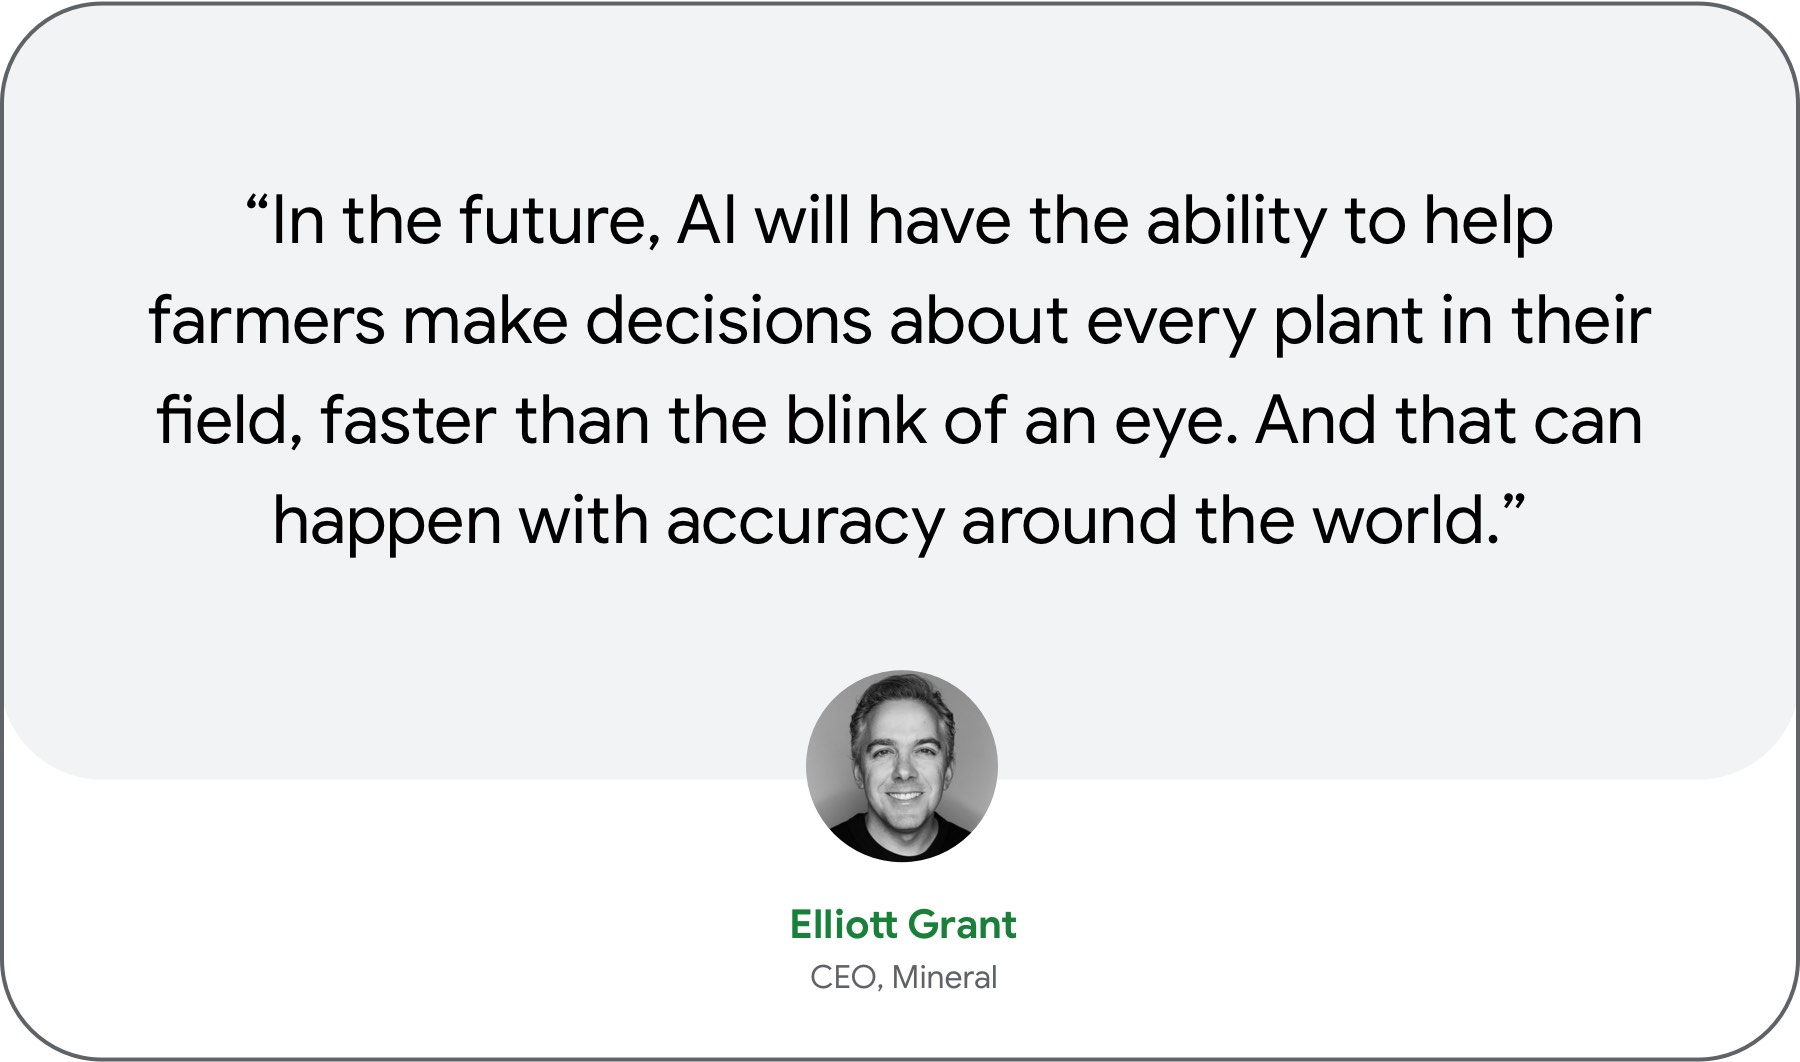 “In the future, AI will have the ability to help farmers make decisions about every plant in their field, faster than the blink of an eye. And that can happen with accuracy around the world.” — Elliott Grant, CEO, Mineral